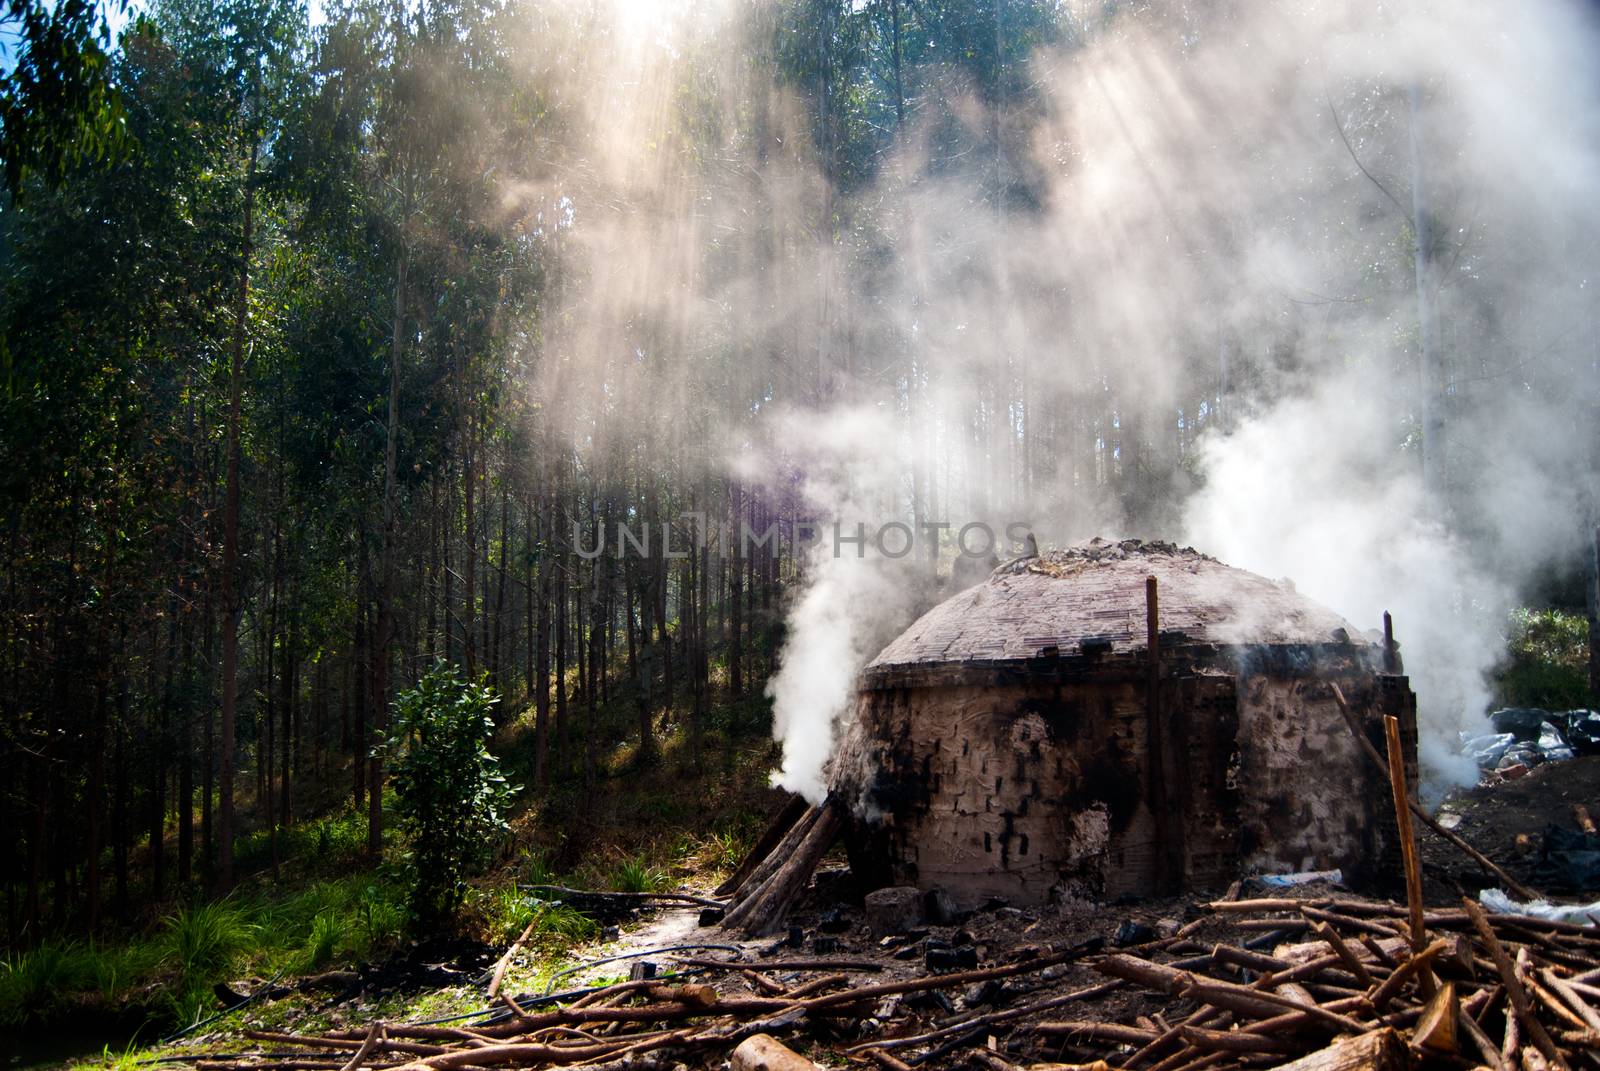 Handmade charcoal kiln for charcoal production in small rural properties in southern Brazil.